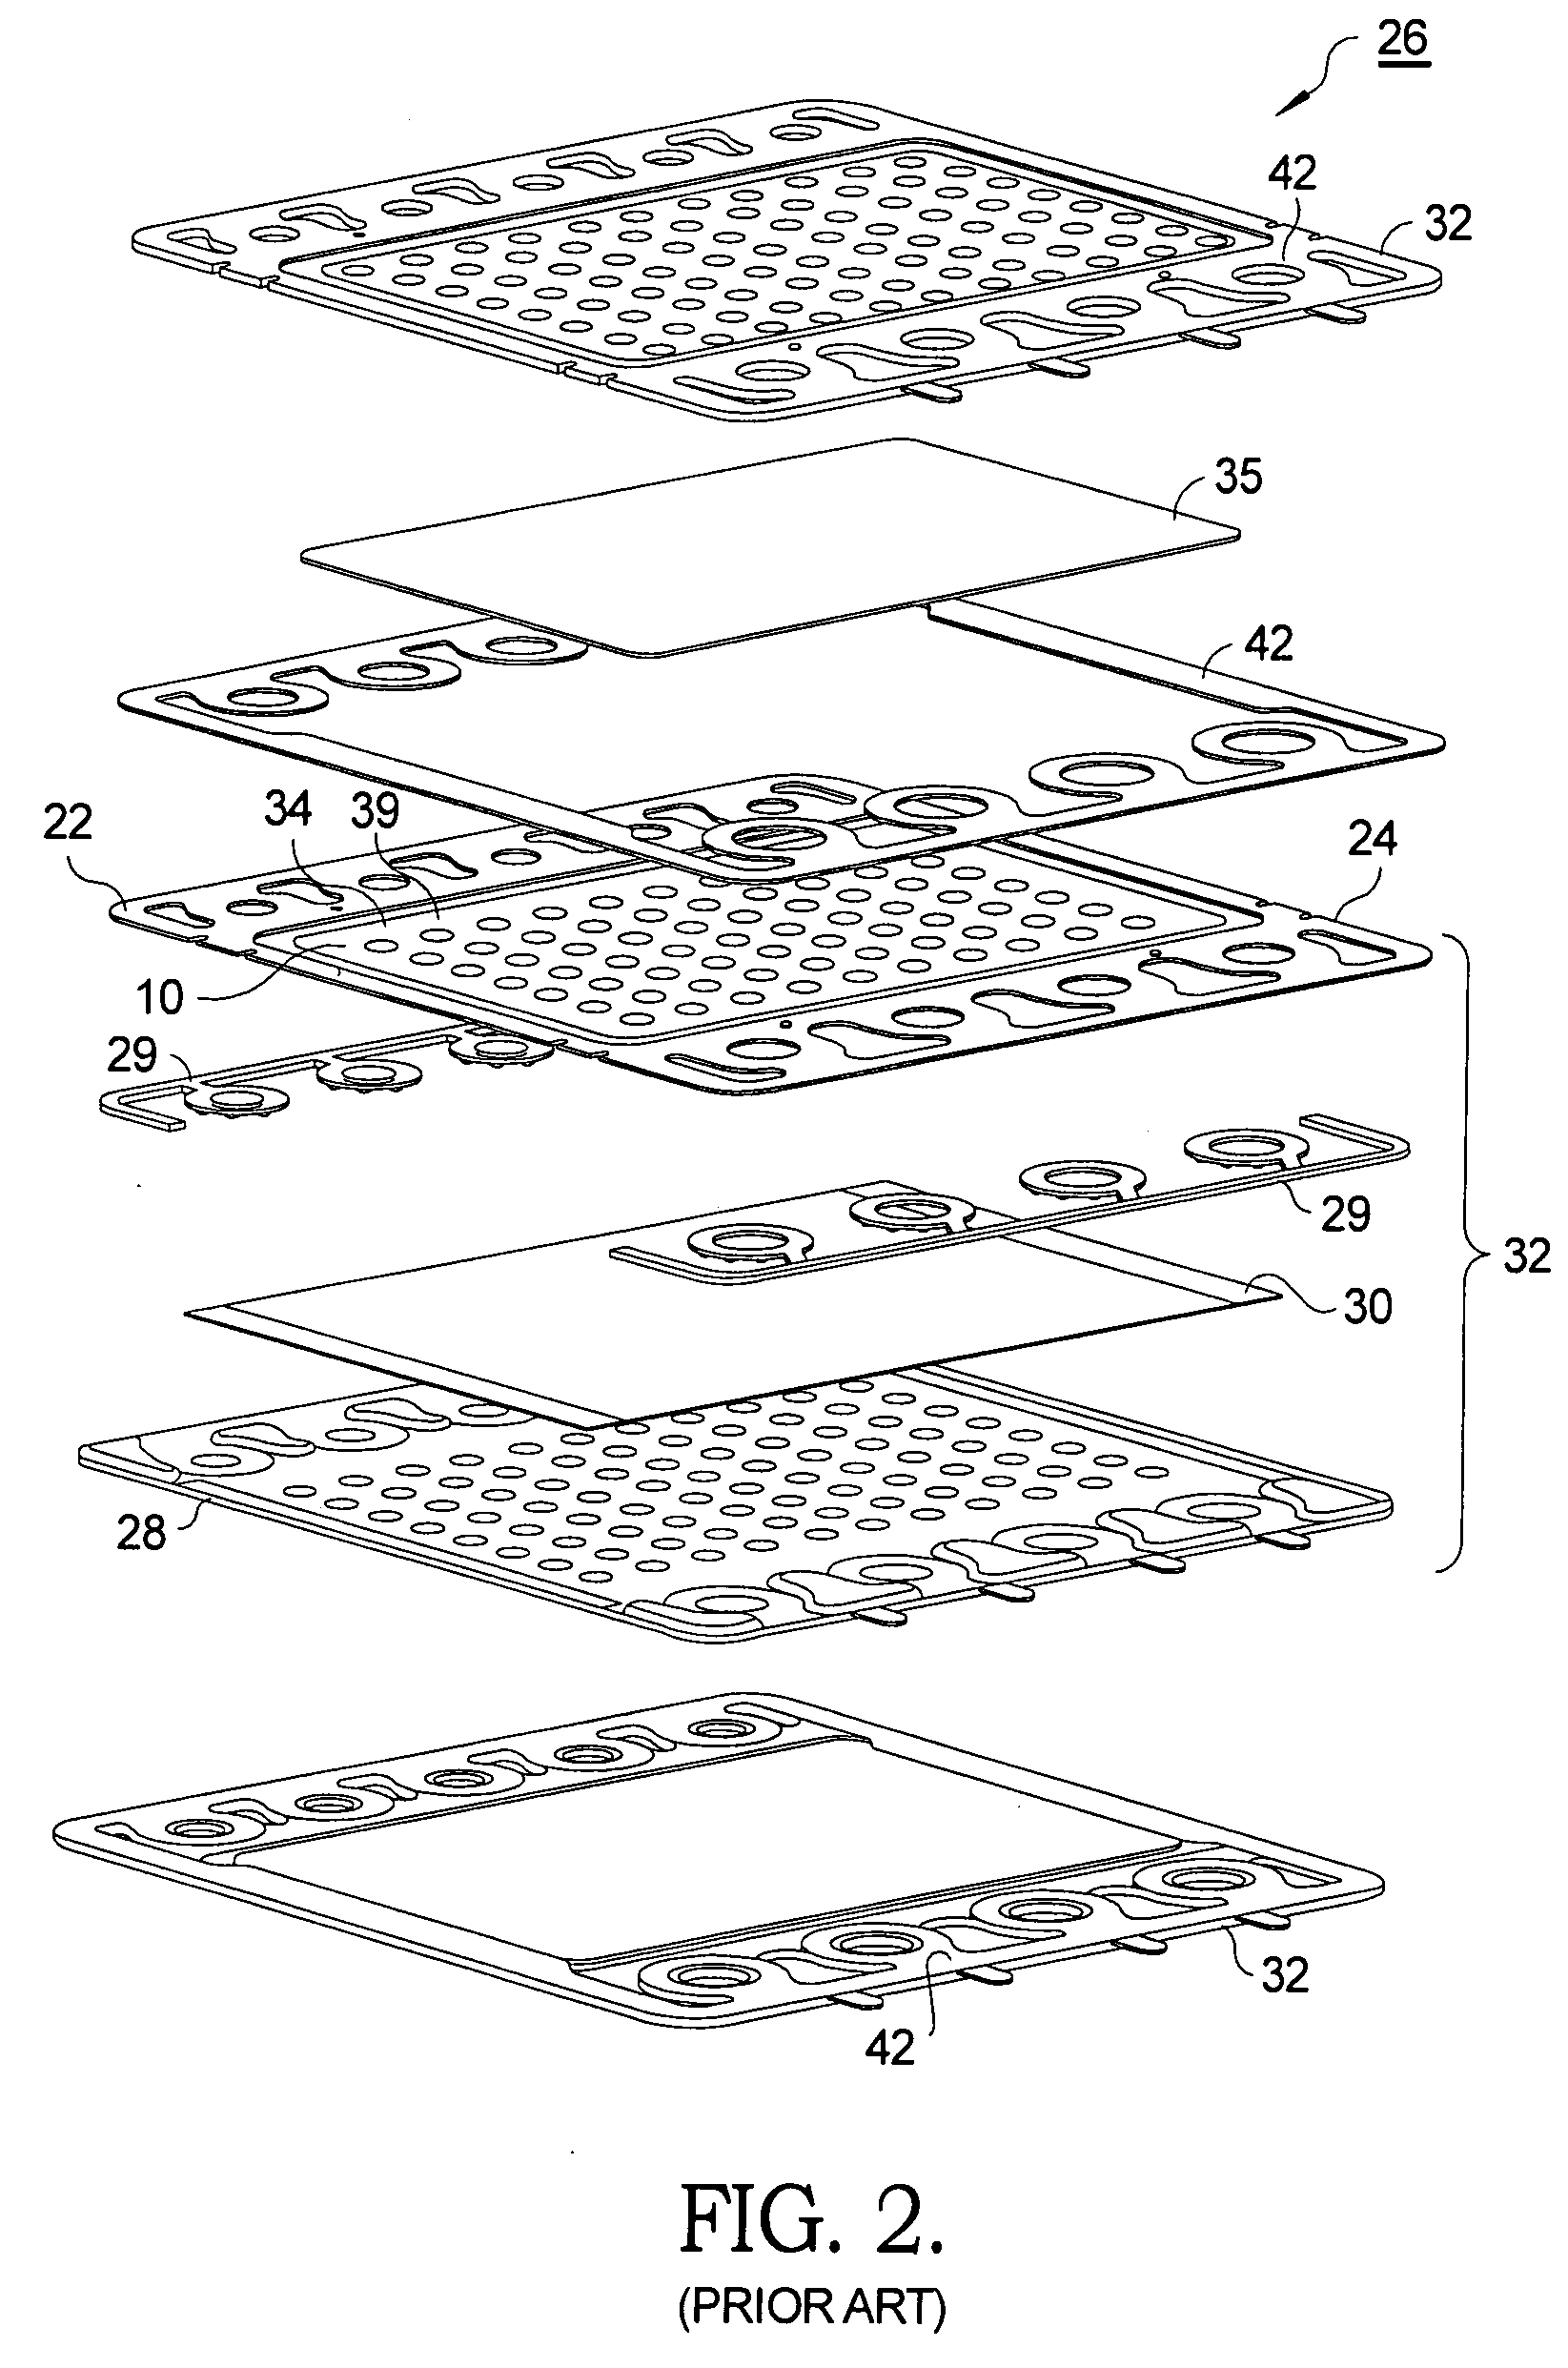 Fuel cell stack having multiple parallel fuel cells